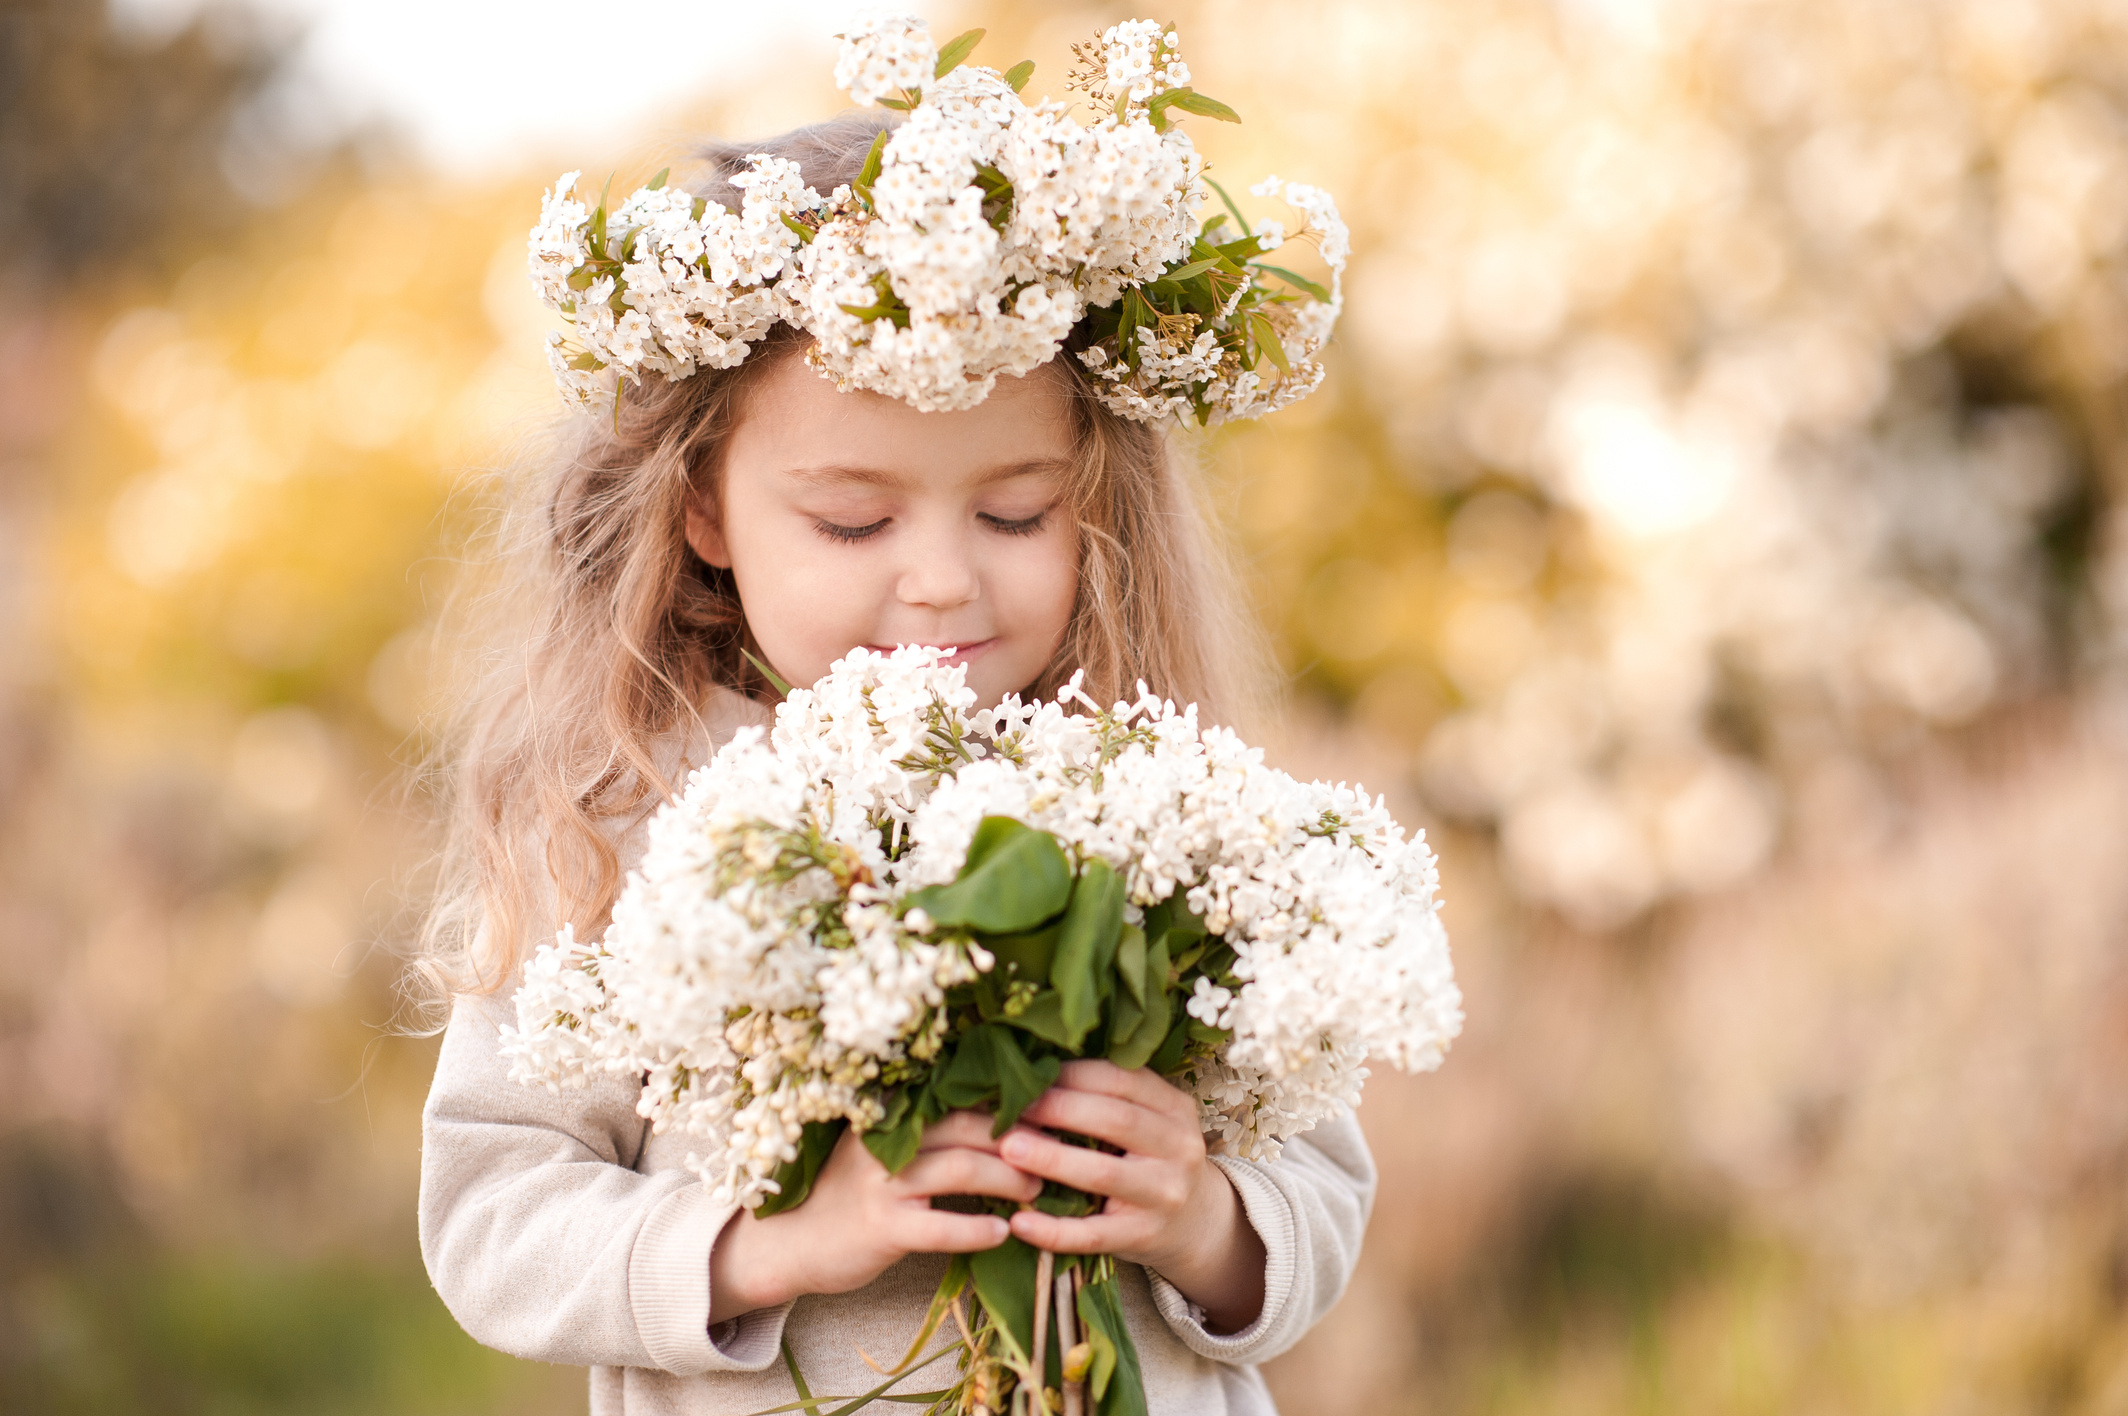 Child girl smelling flowers outdoors